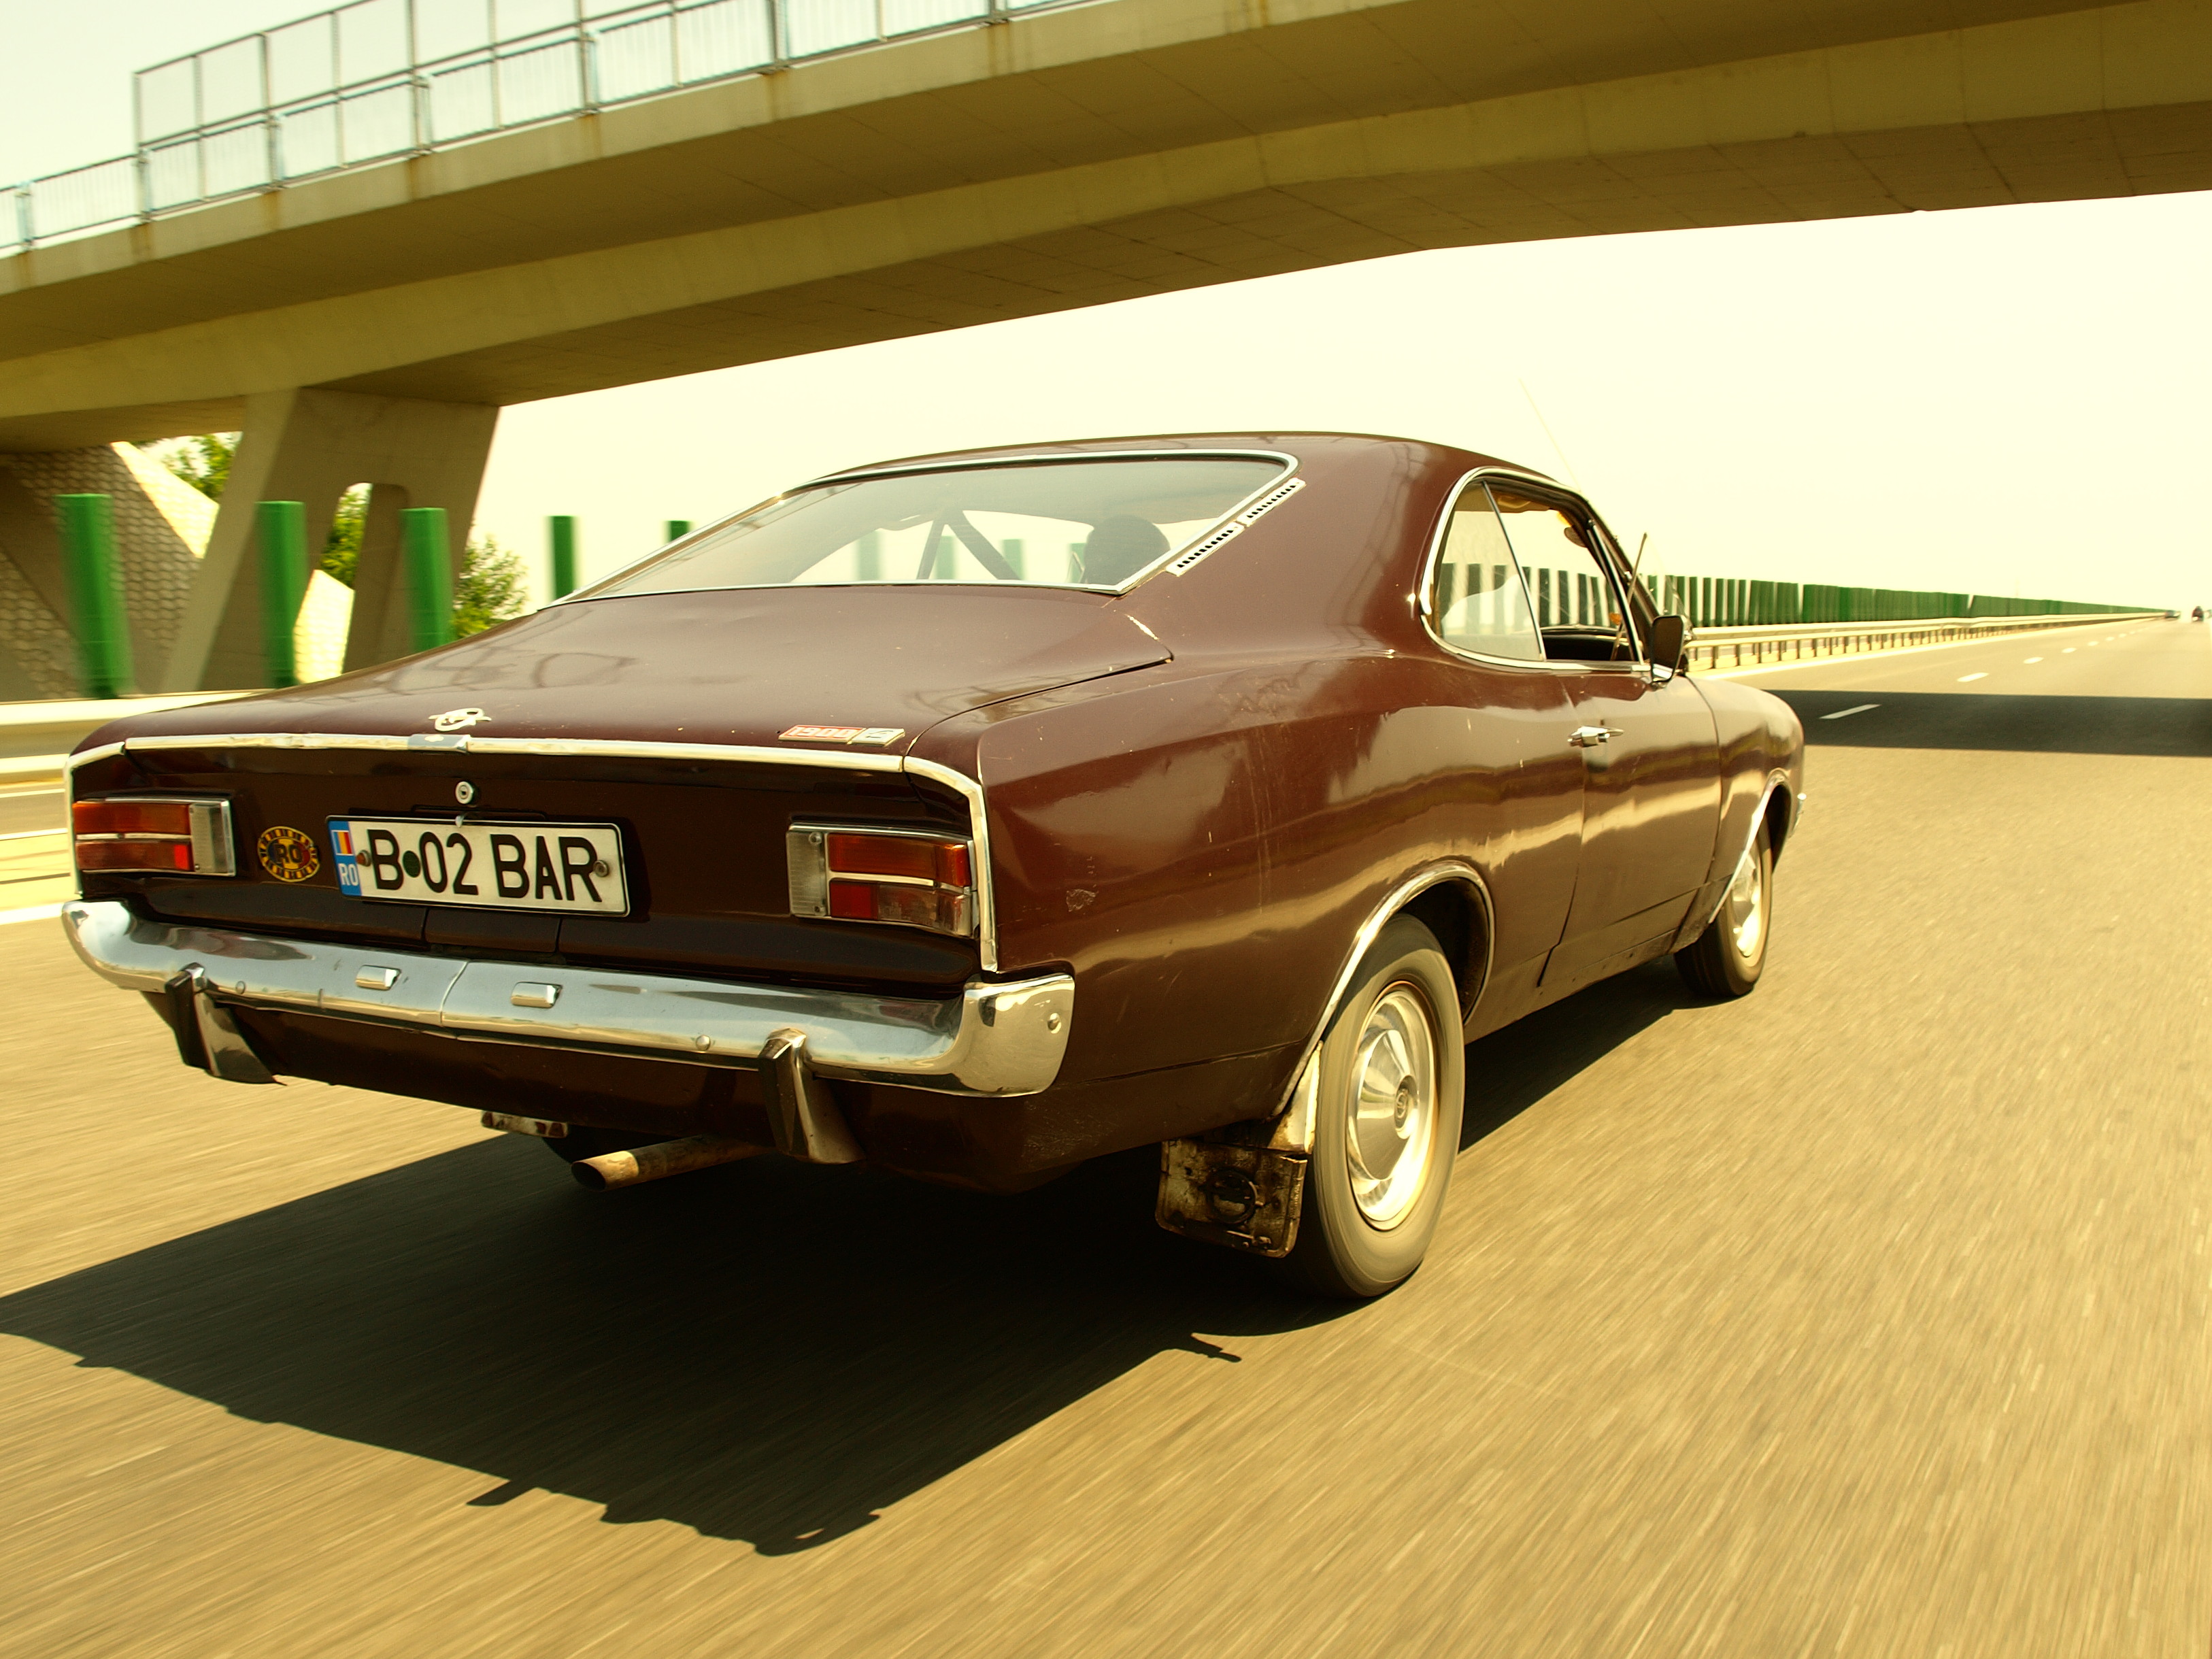 Opel Commodore A Coupe Automatic 2500 G. View Download Wallpaper. 3252x2439